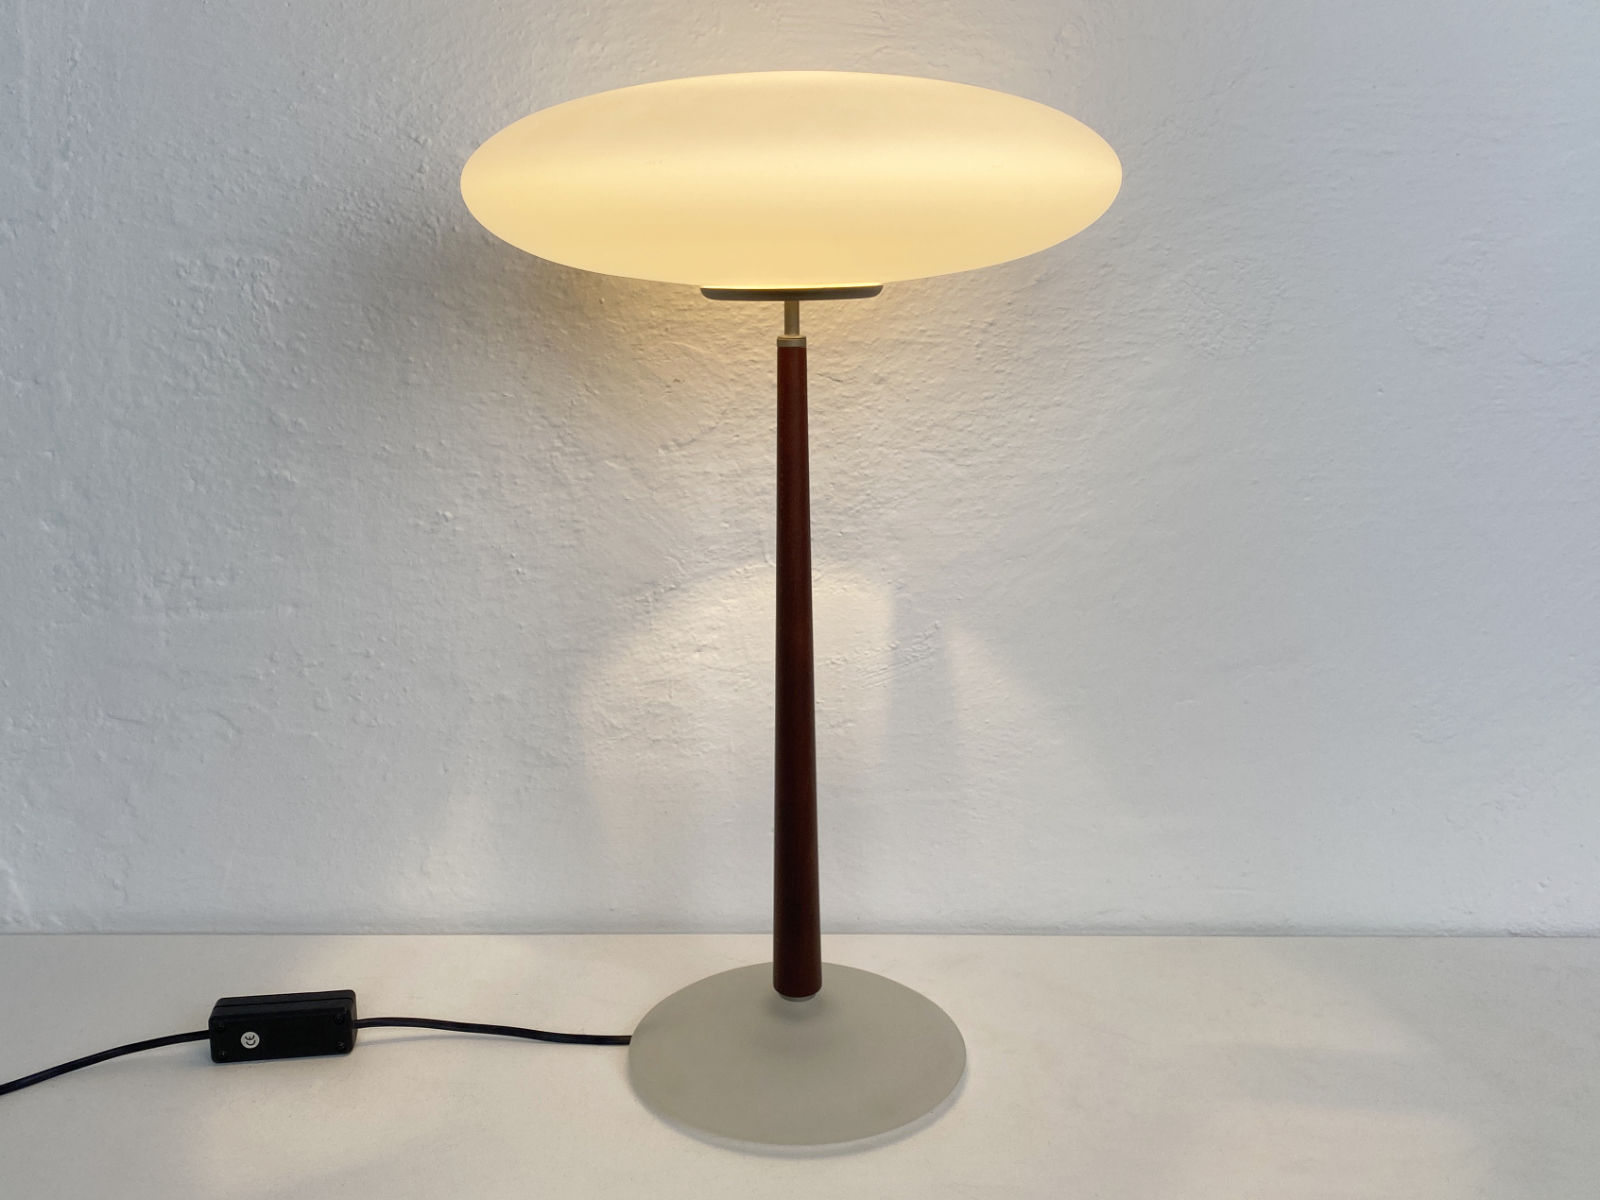 Postmodern Table Lamp PAO T2 by Matteo Thun for Arteluce, Italy, 1990s